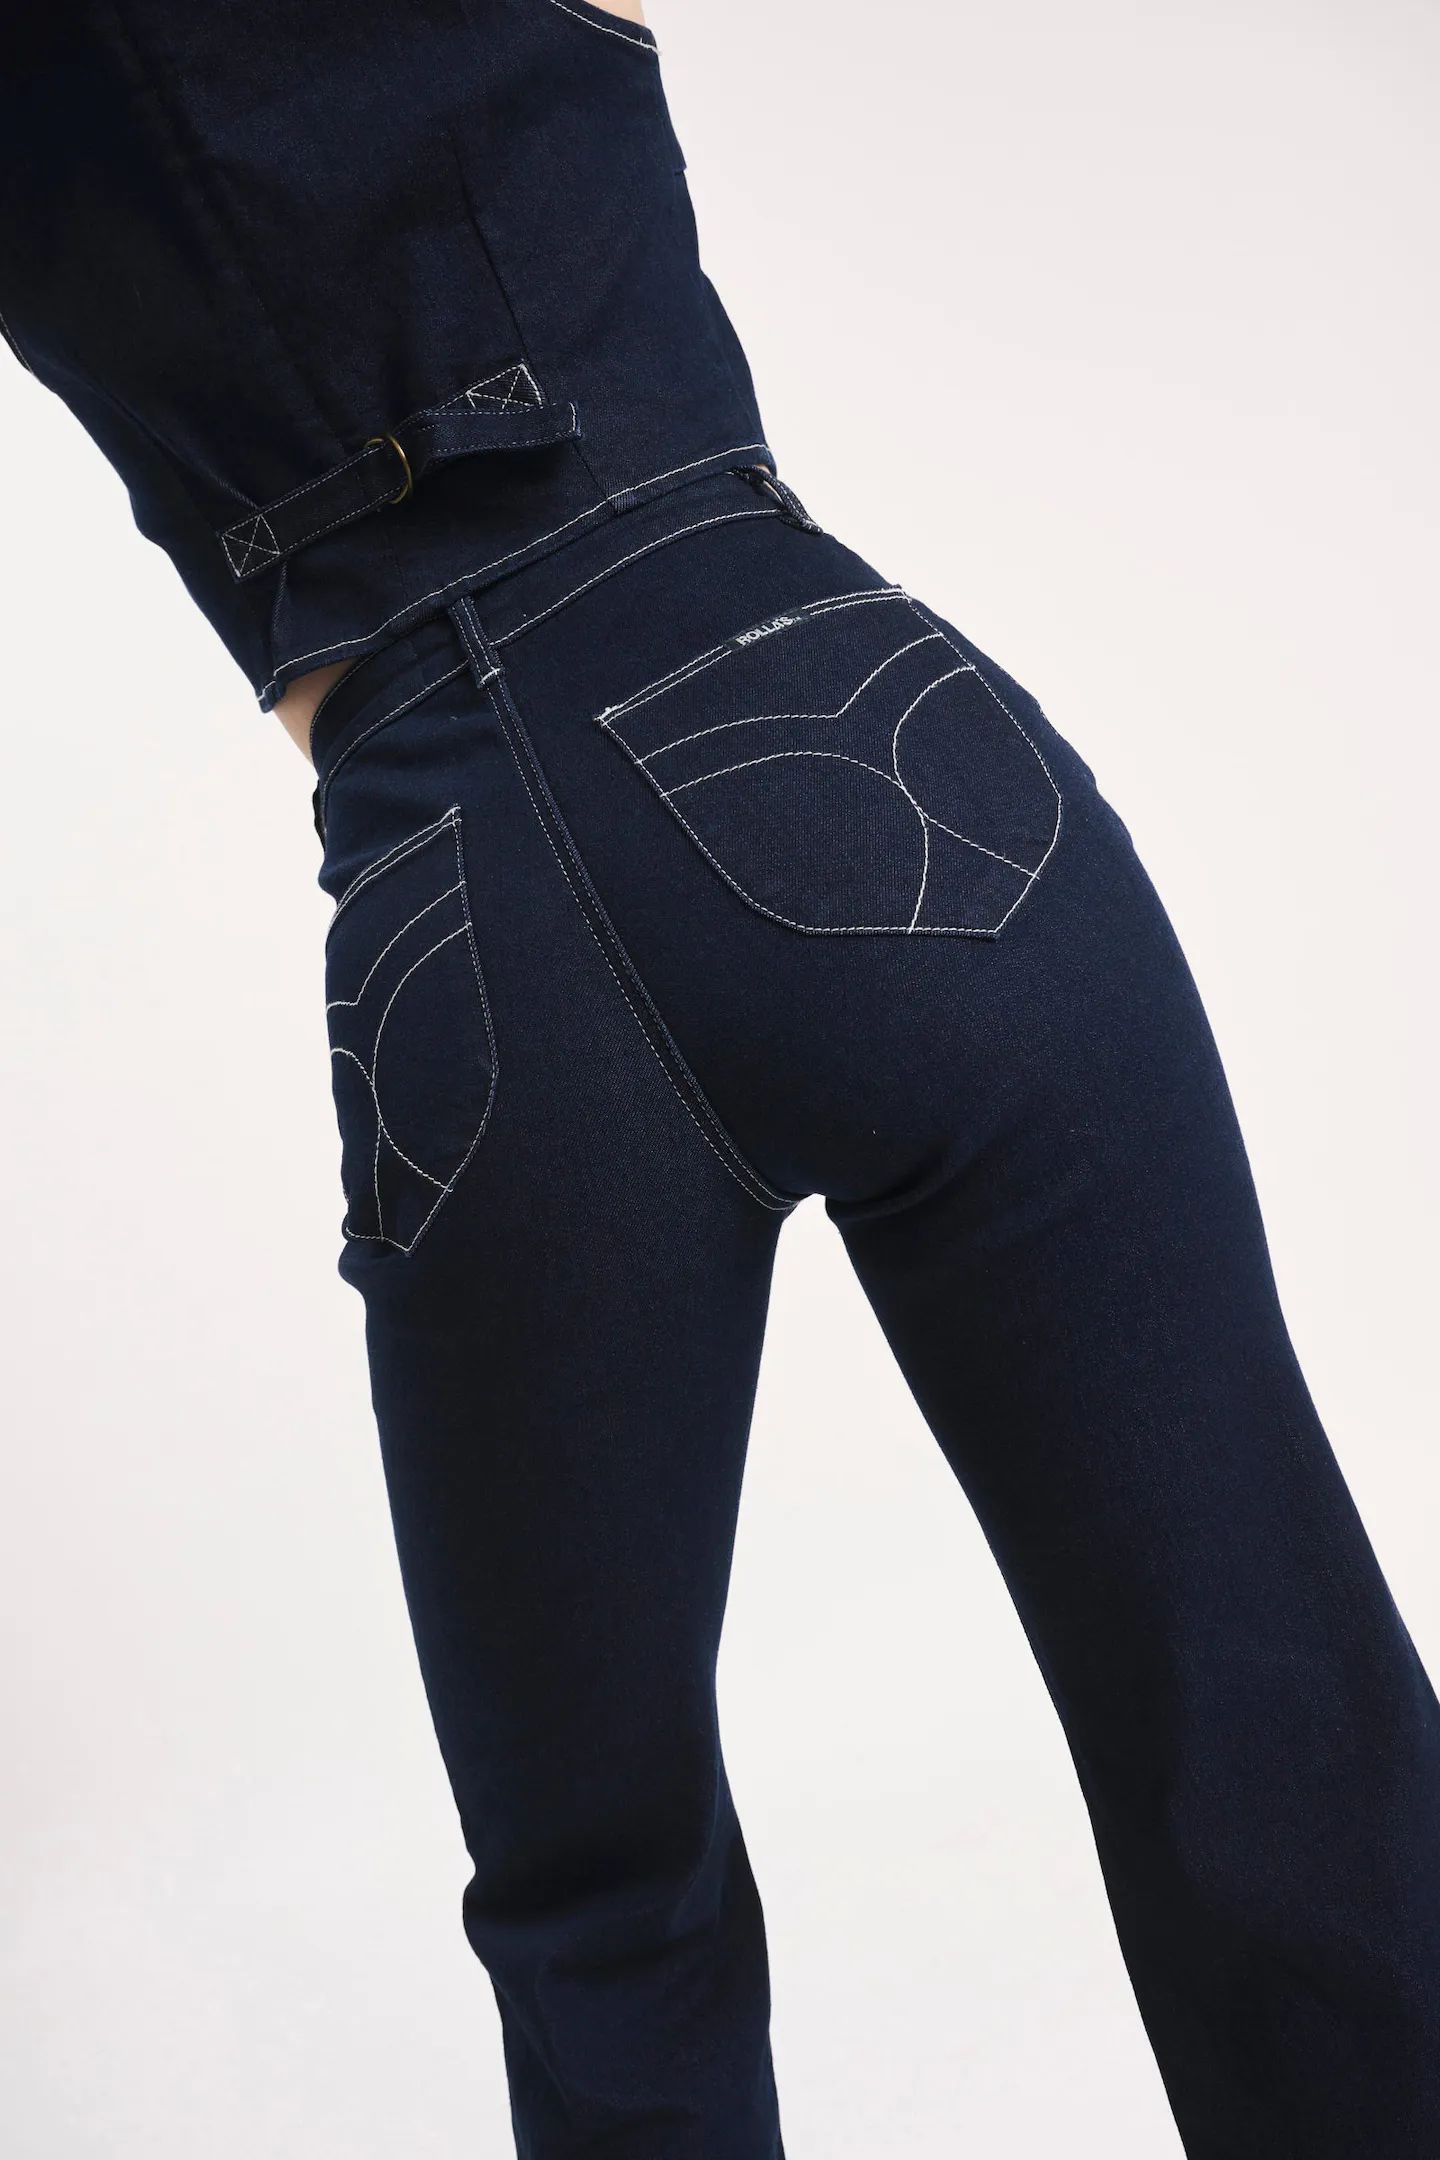 Eastcoast Flare - Dante | Rolla's Jeans US/CAN